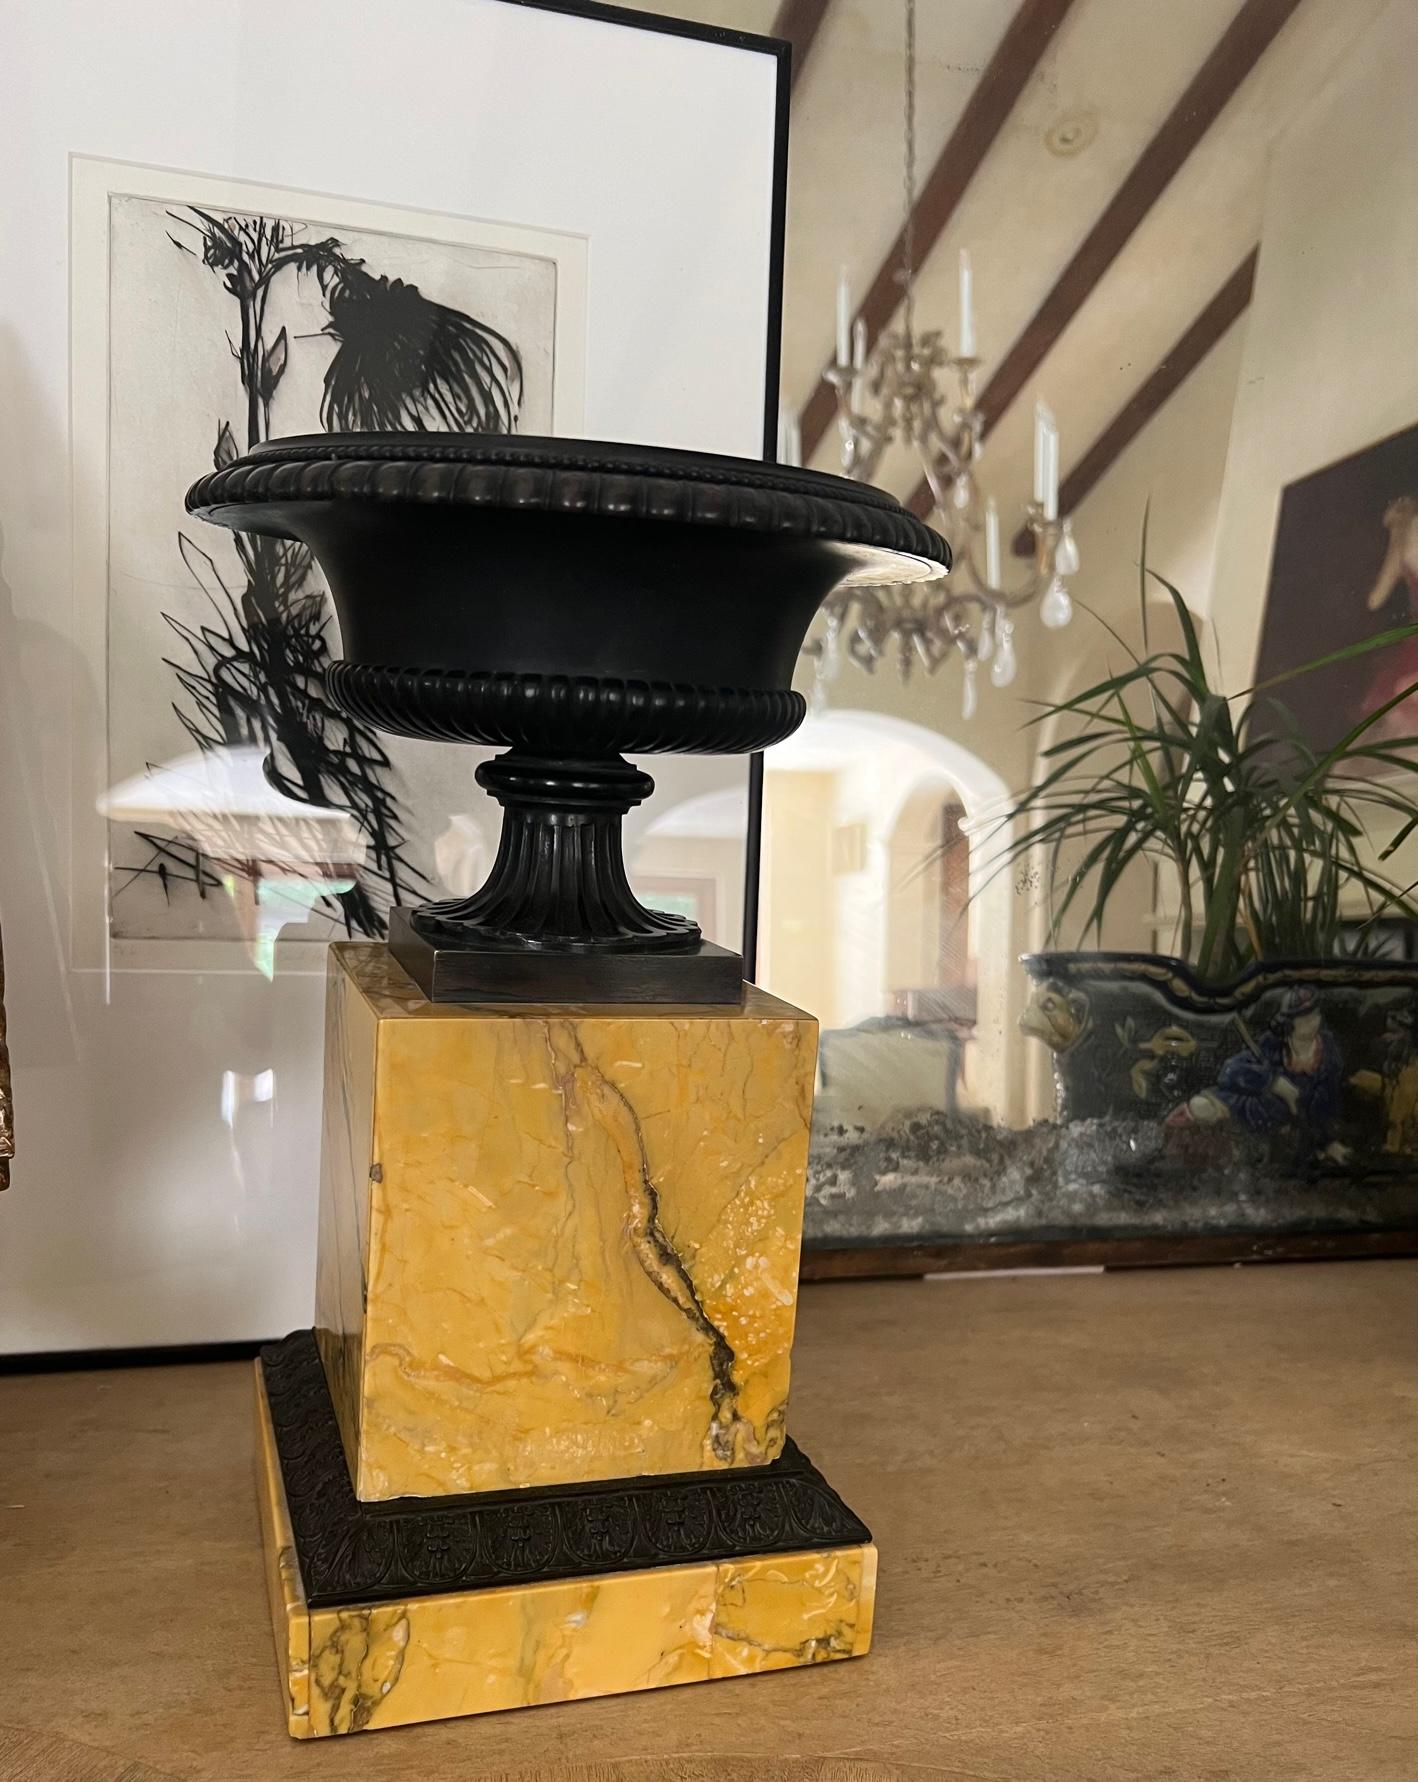 Antique vibrant yellow Sienna marble Grand Tour tazza. Includes a bronze cup, the base is a layer of yellow marble applied to a concrete base.